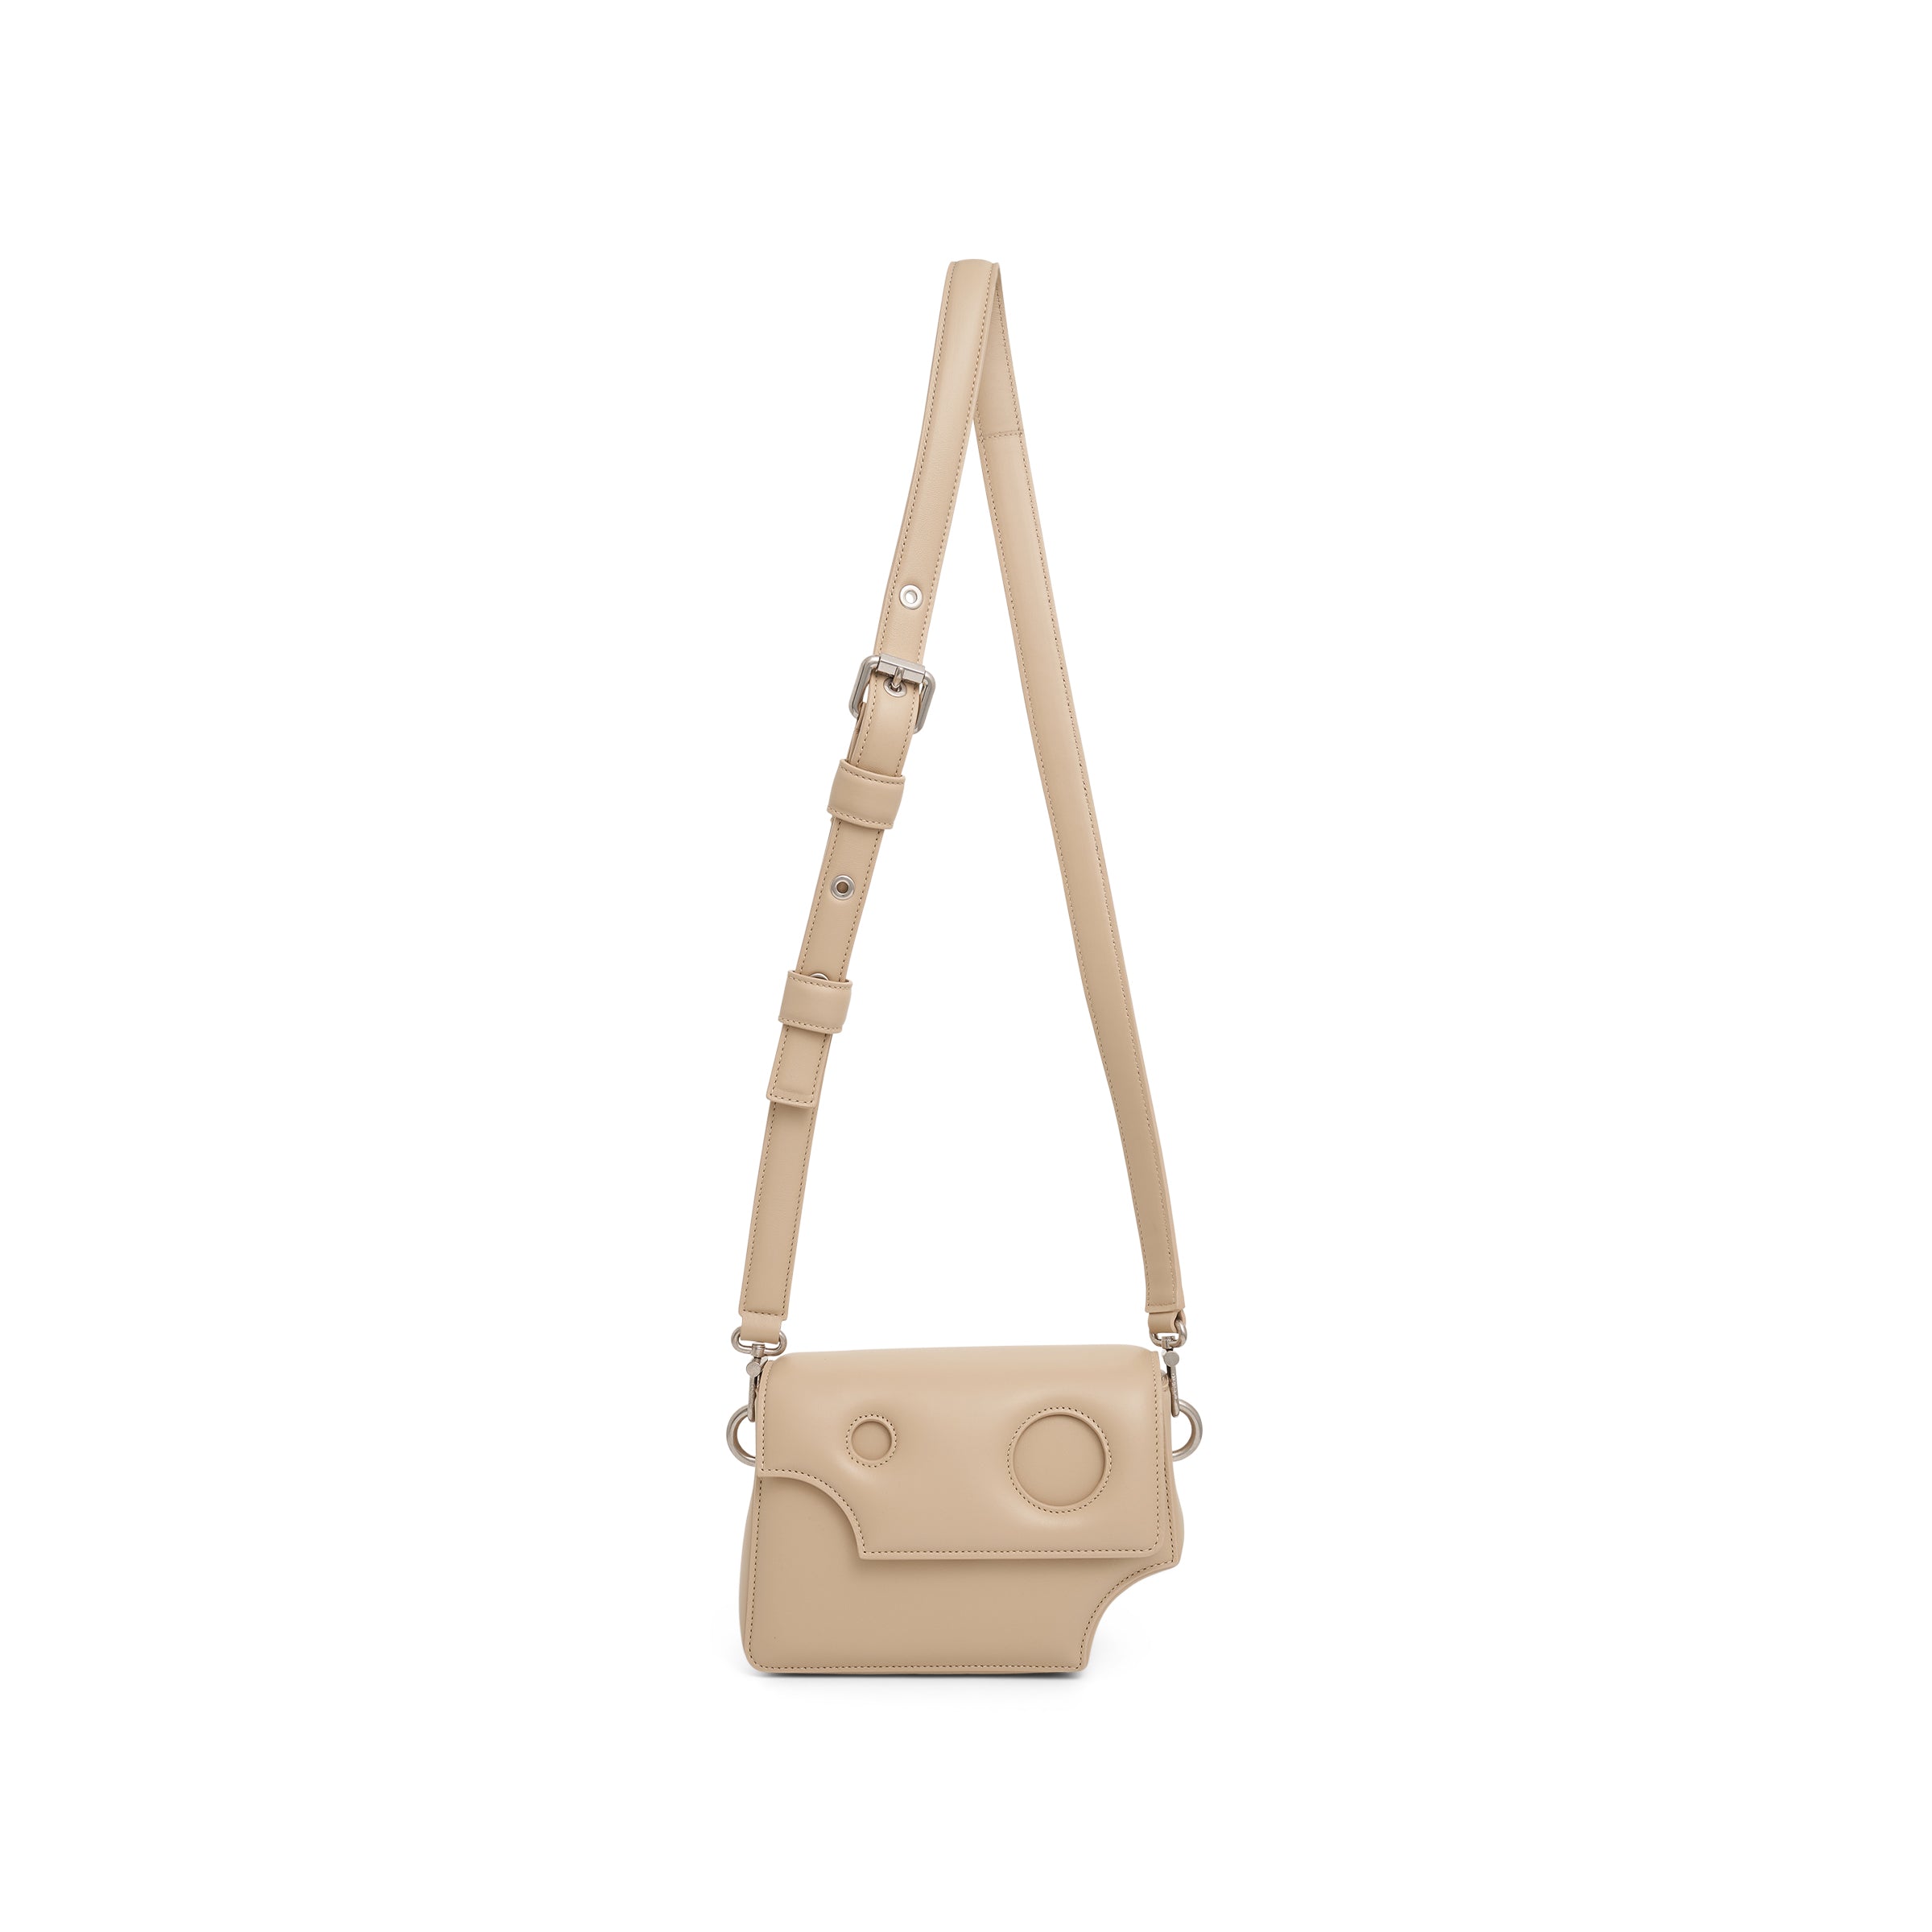 Burrow 22 Off White bag in nappa leather with holes